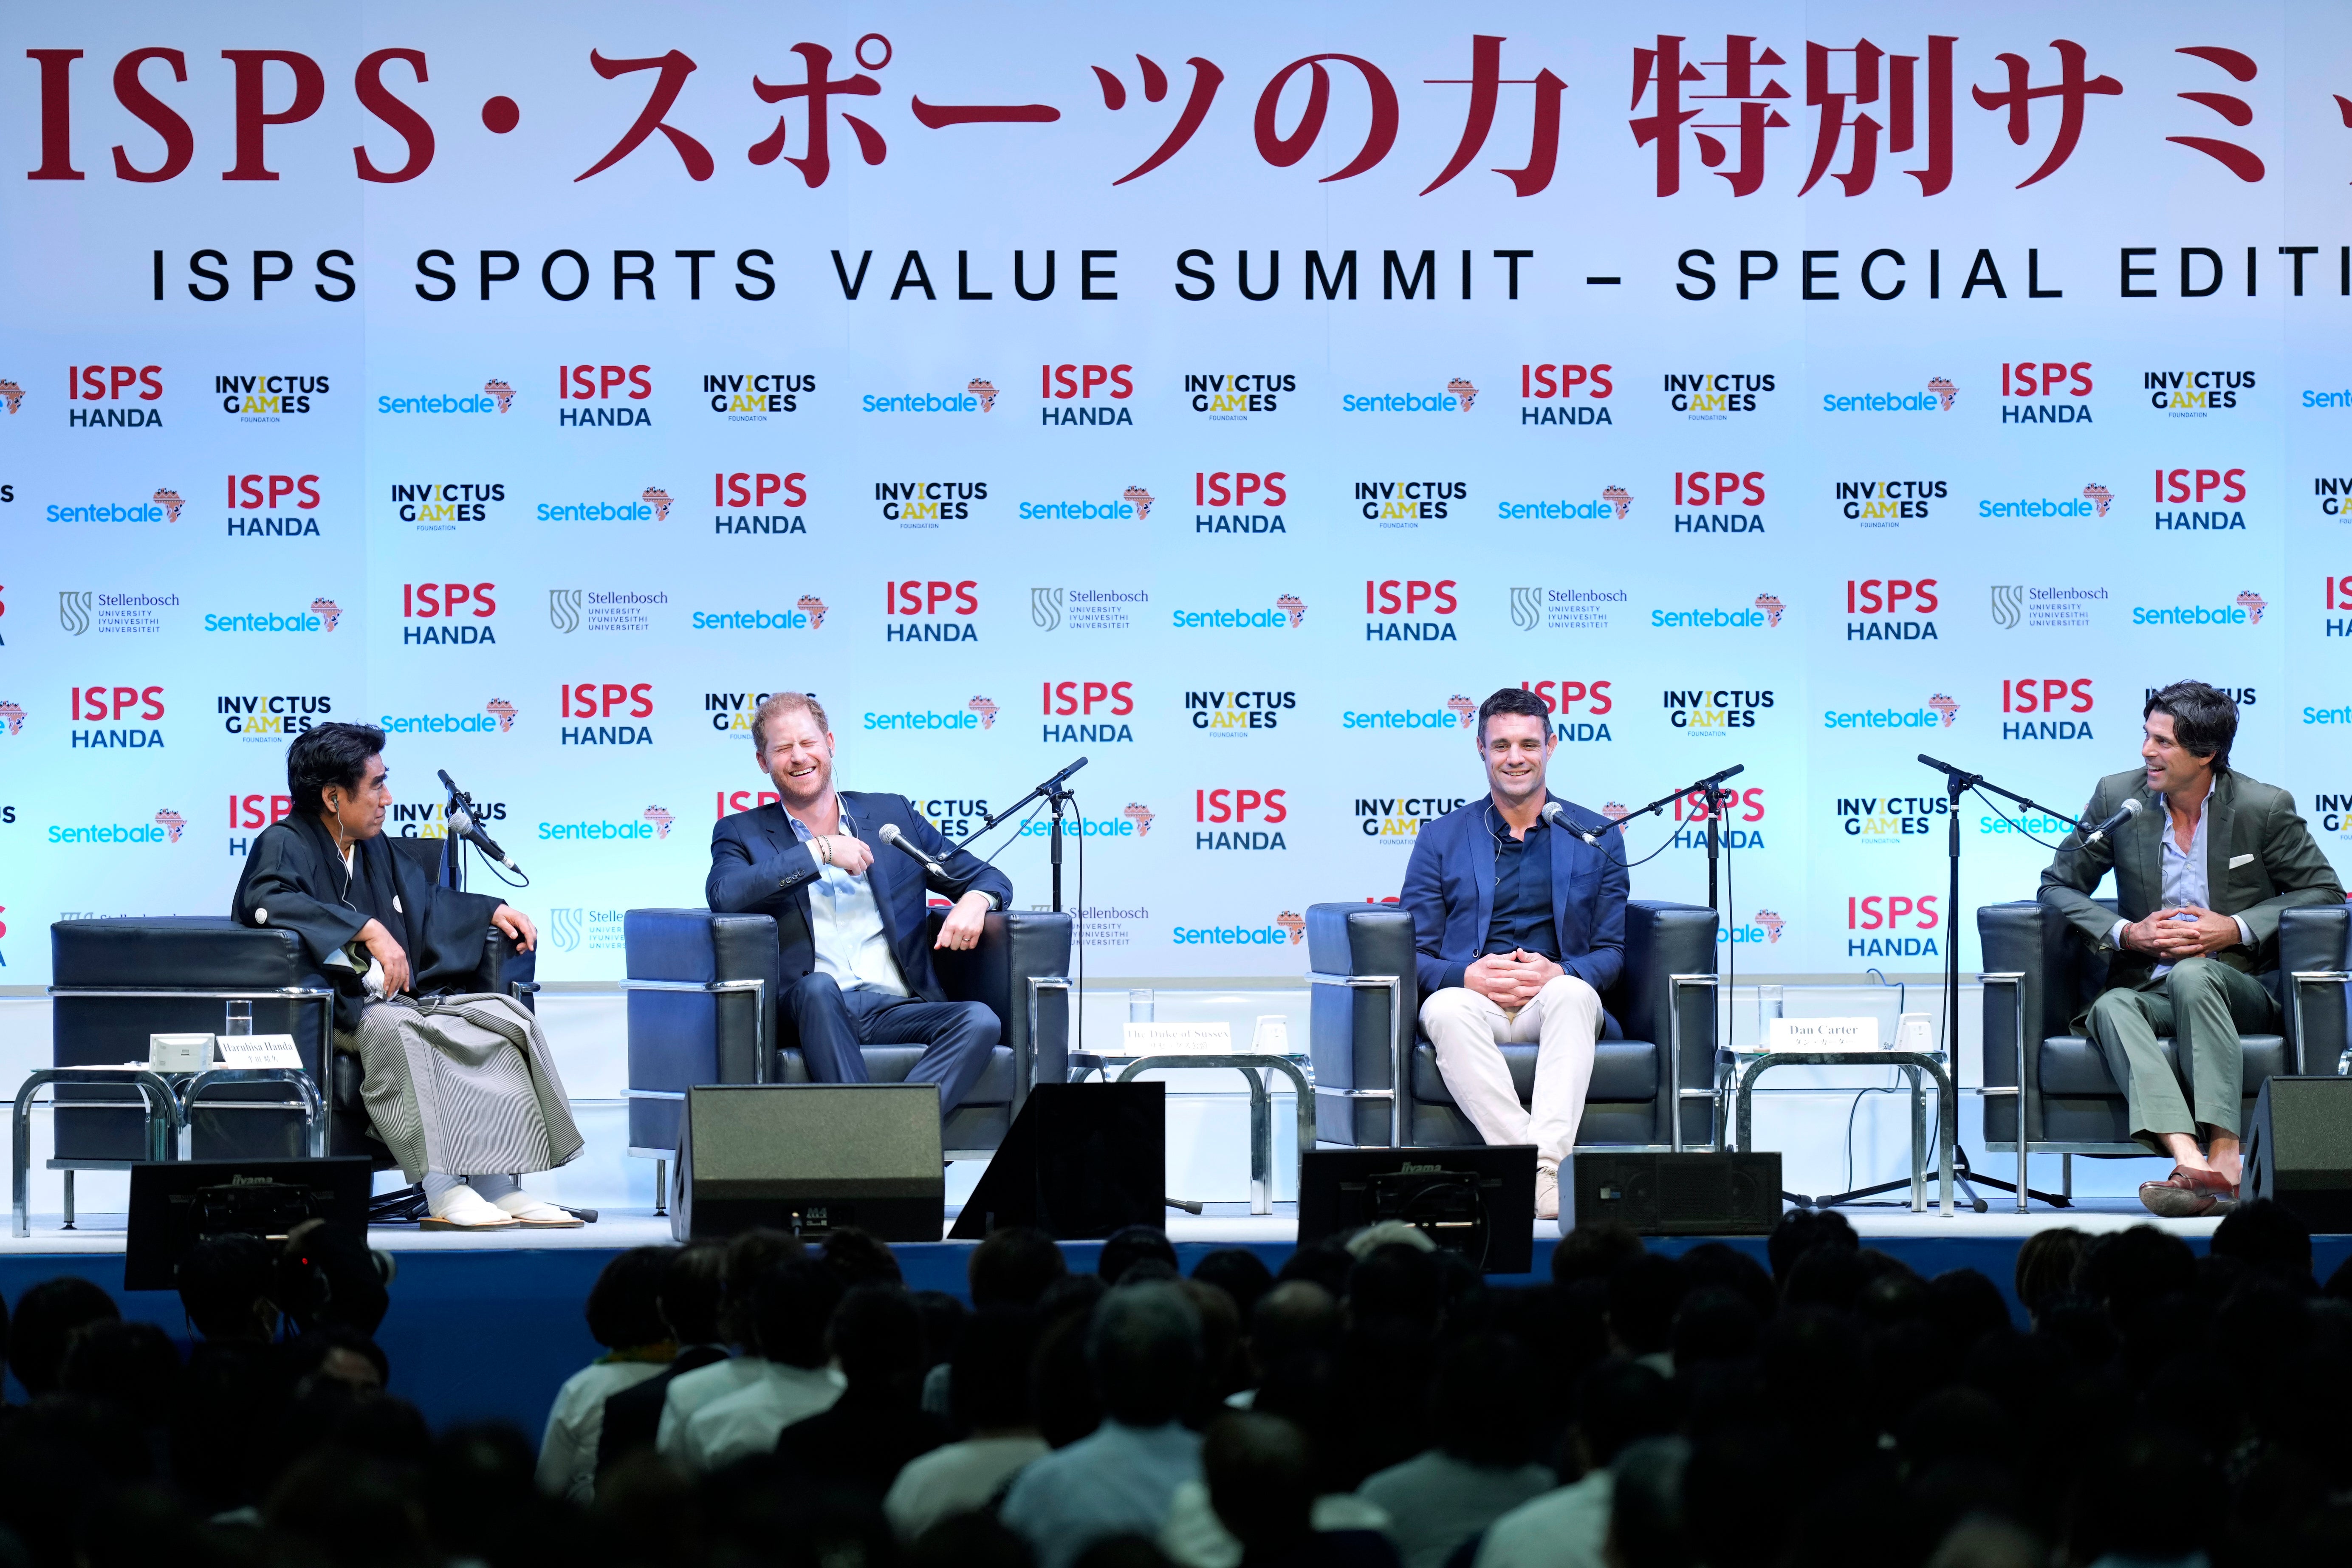 Haruhisa Handa, from left, CEO of the International Sports Promotion Society (ISPS), Britain's Prince Harry, former All Blacks player Dan Carter and Argentine polo player Ignacio "Nacho" Figueras attend an event organized by the ISPS Wednesday, Aug. 9, 2023